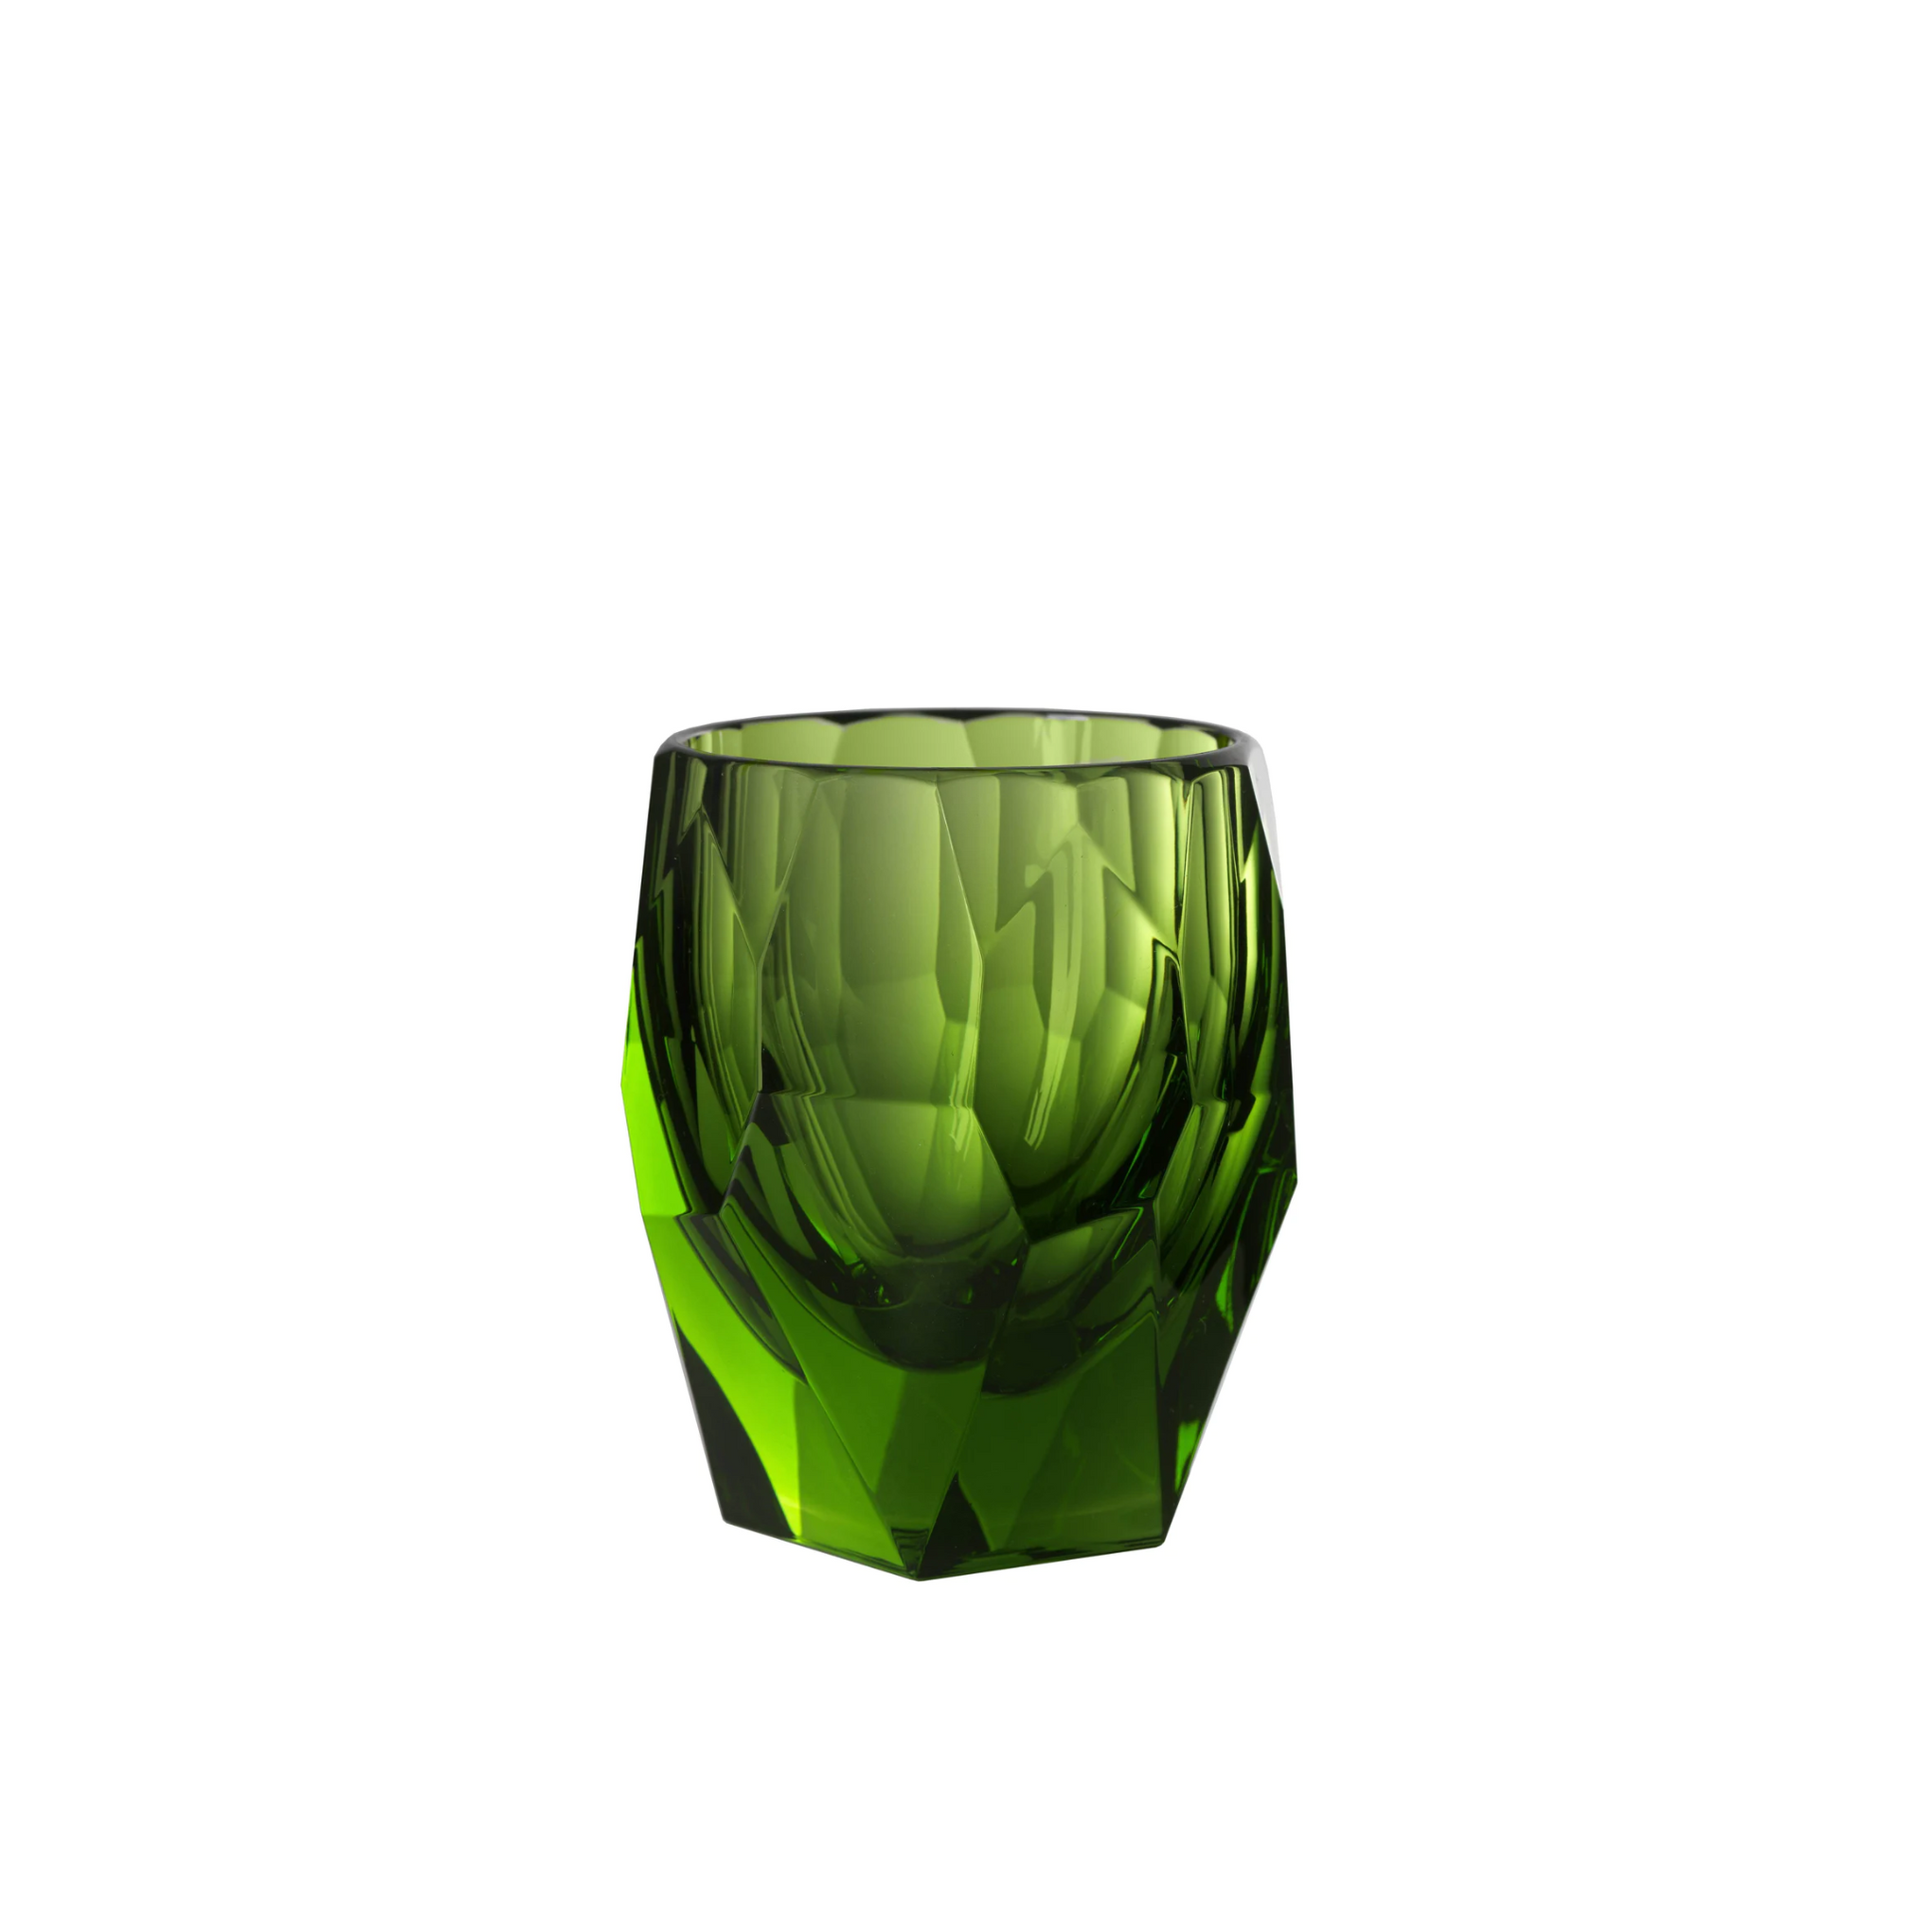 Super Milly Tumbler pistachio green outdoor dining